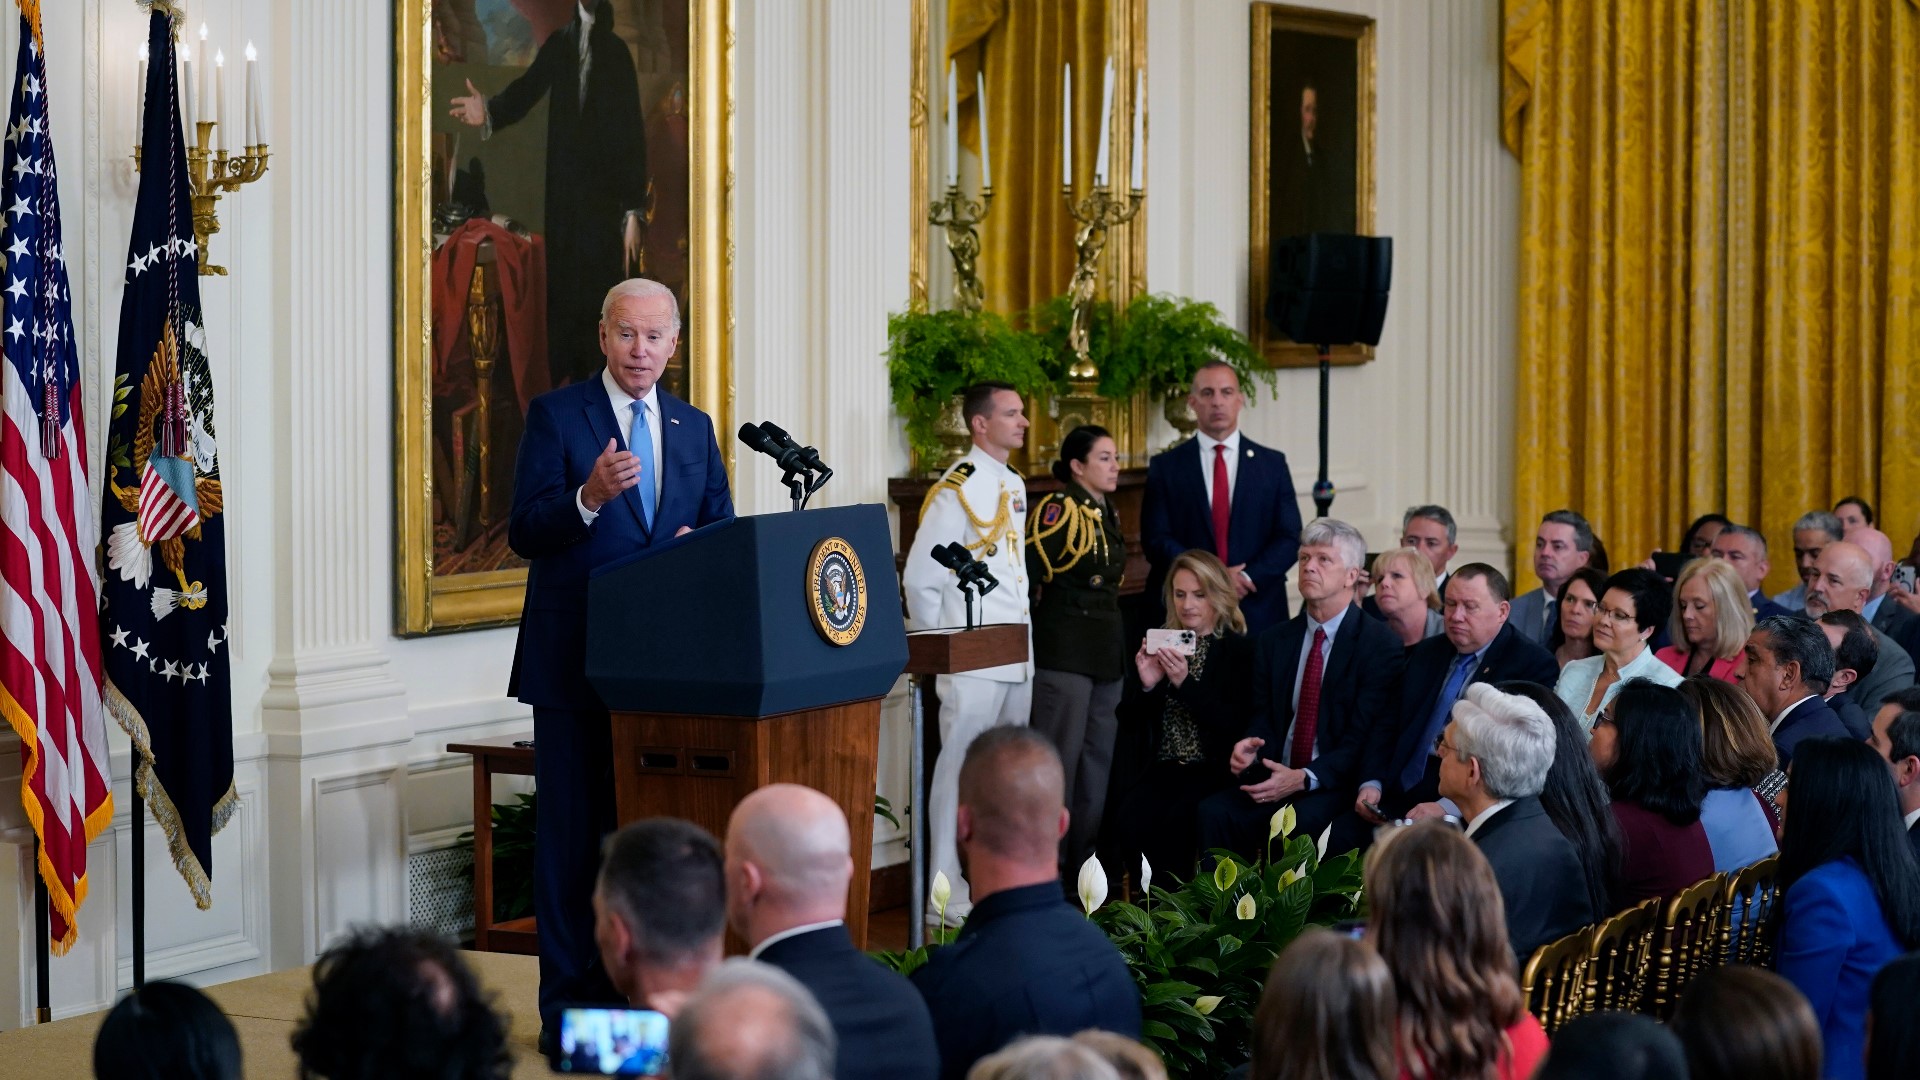 Biden told the crowd the award was given for “actions above and beyond the call of duty,” singling out the families of the officers to thank them.